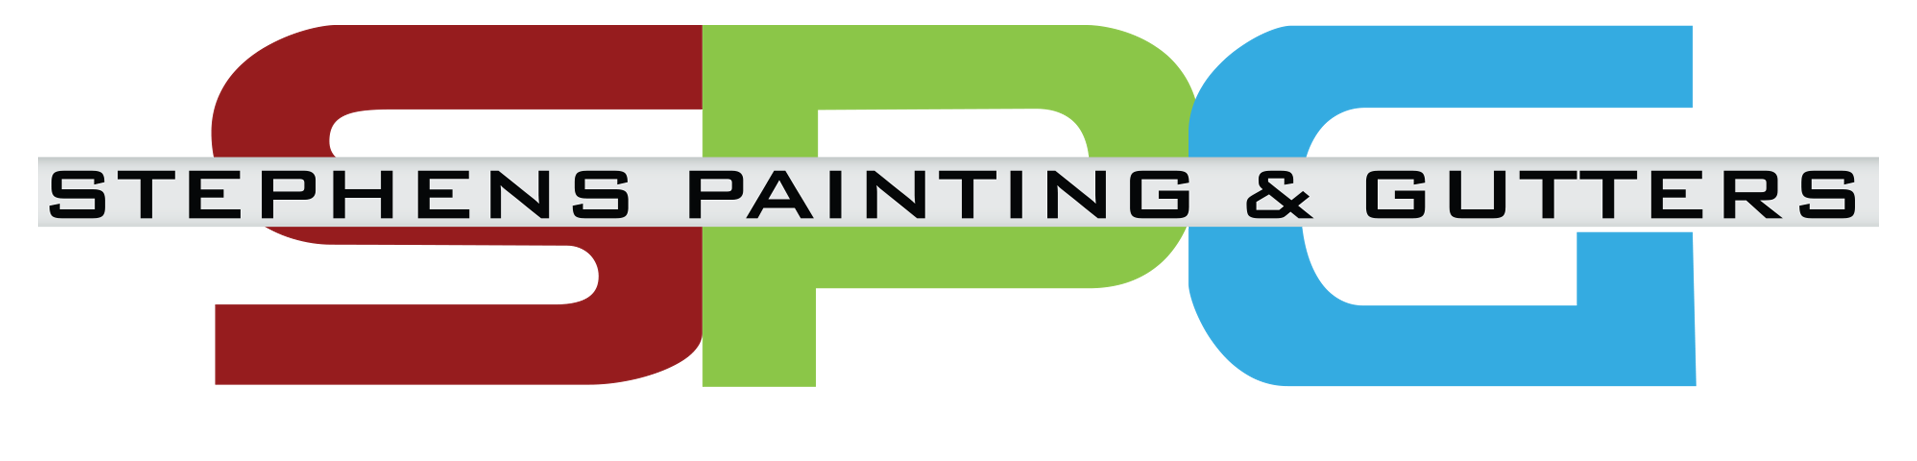 Stephens Painting and Gutters - Logo